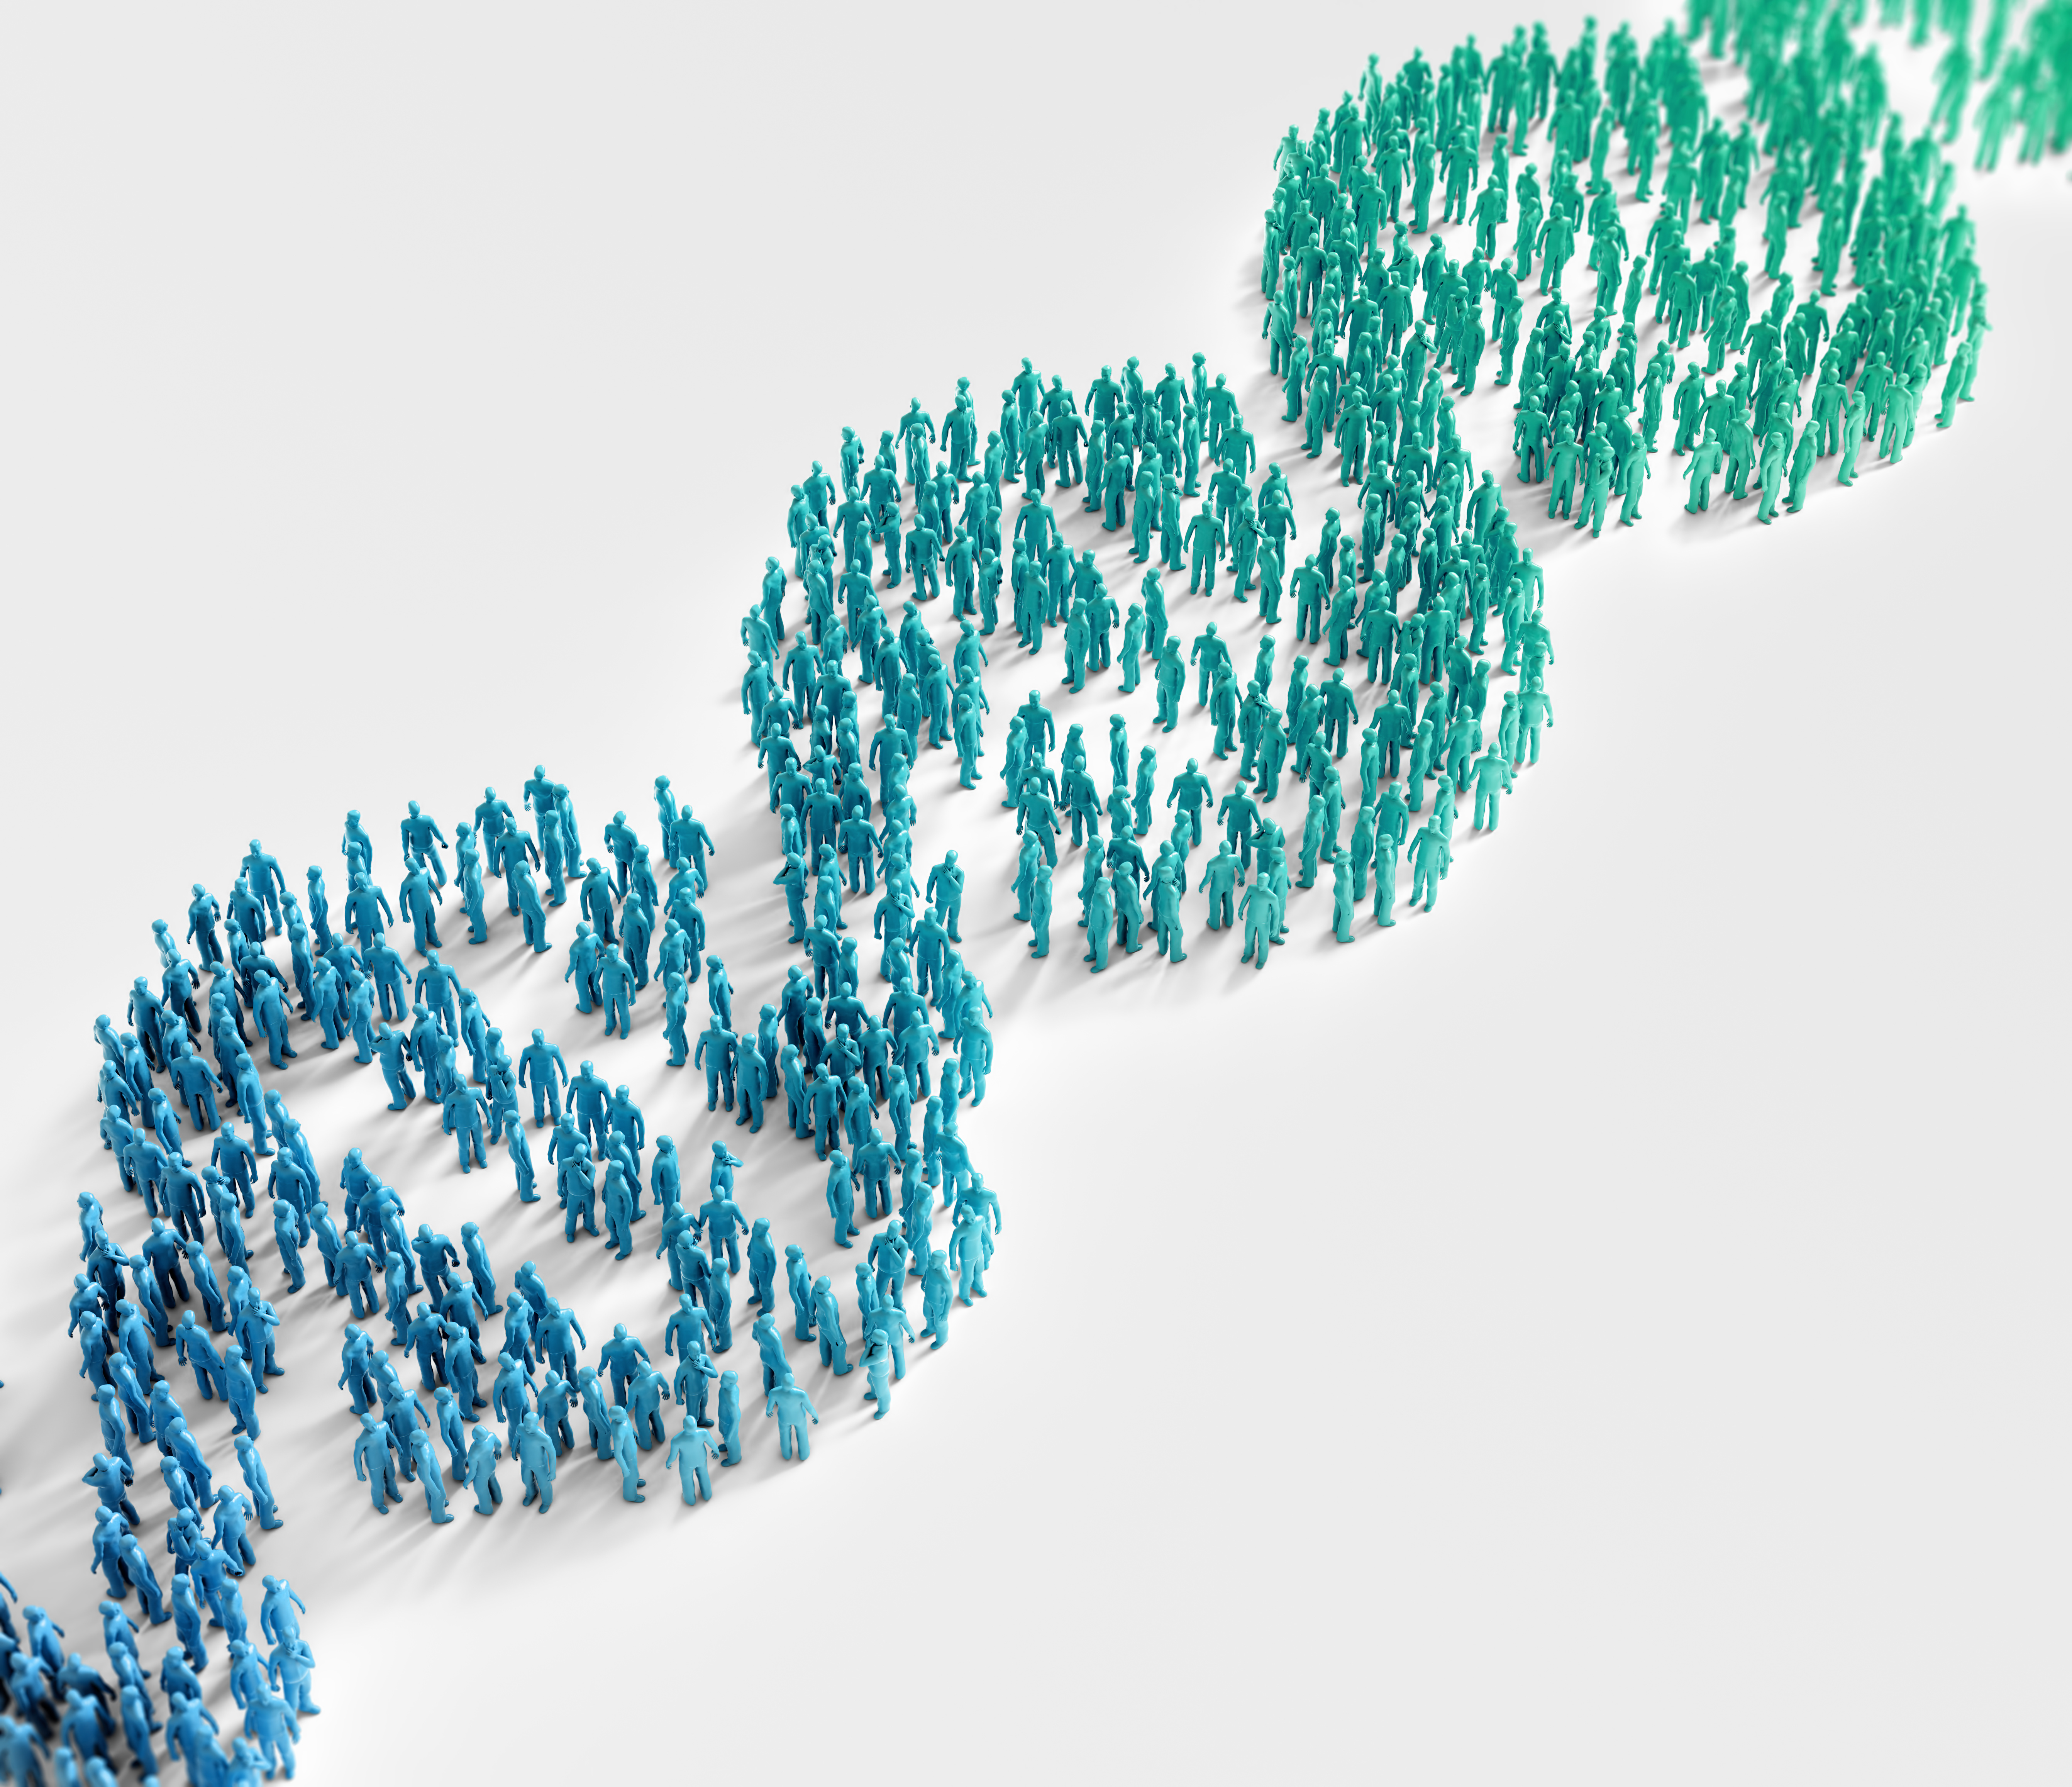 Tiny people forming a DNA helix